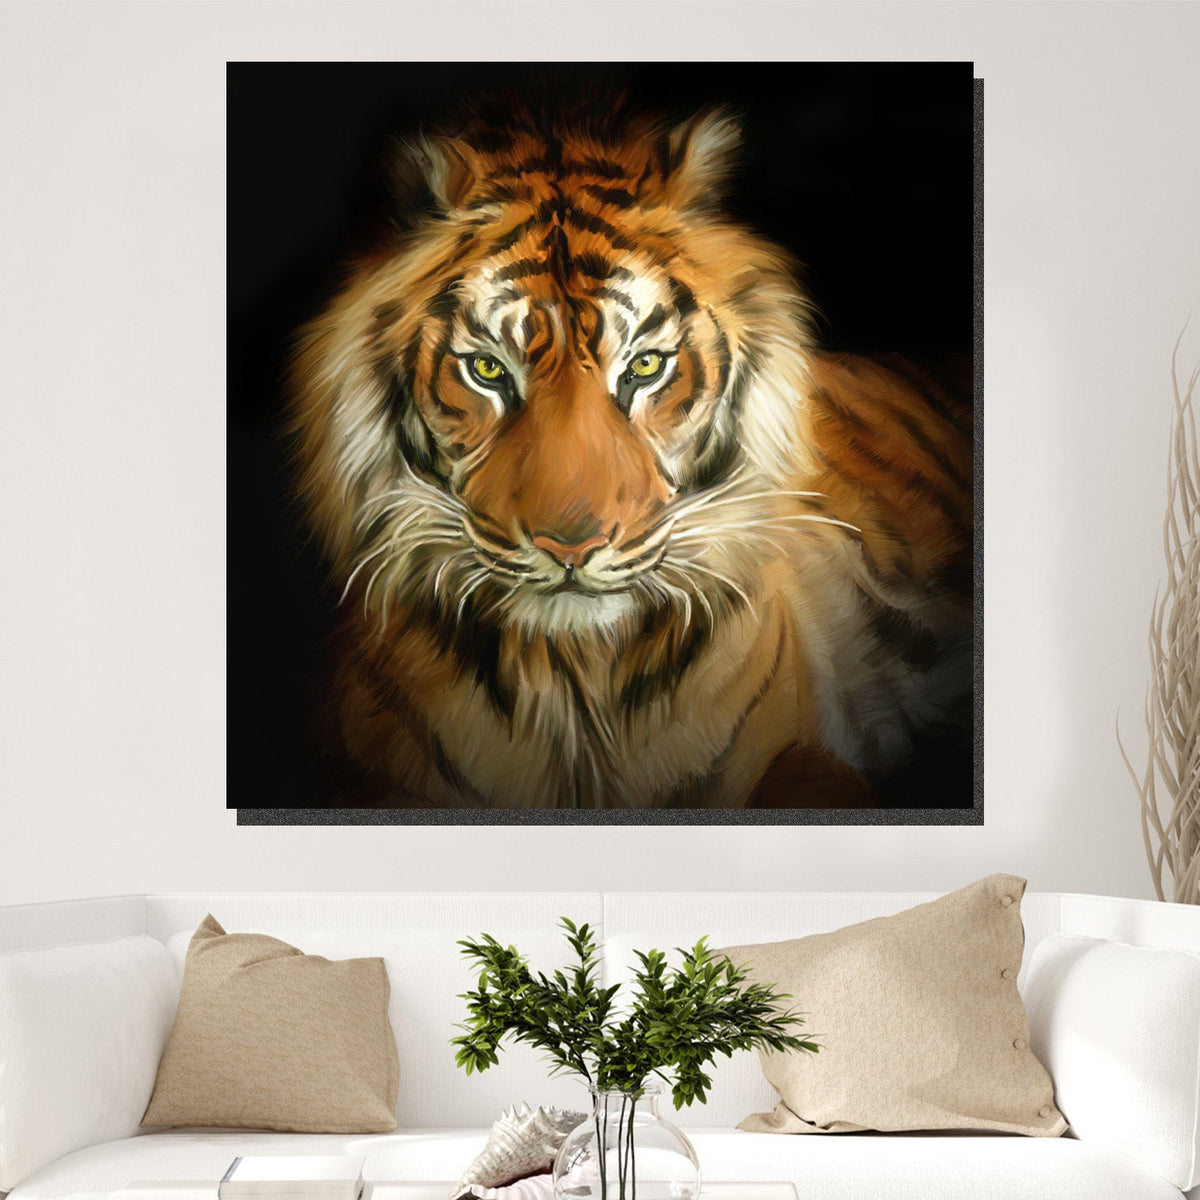 https://cdn.shopify.com/s/files/1/0387/9986/8044/products/PaintedTigerCanvasArtprintStretched-4.jpg